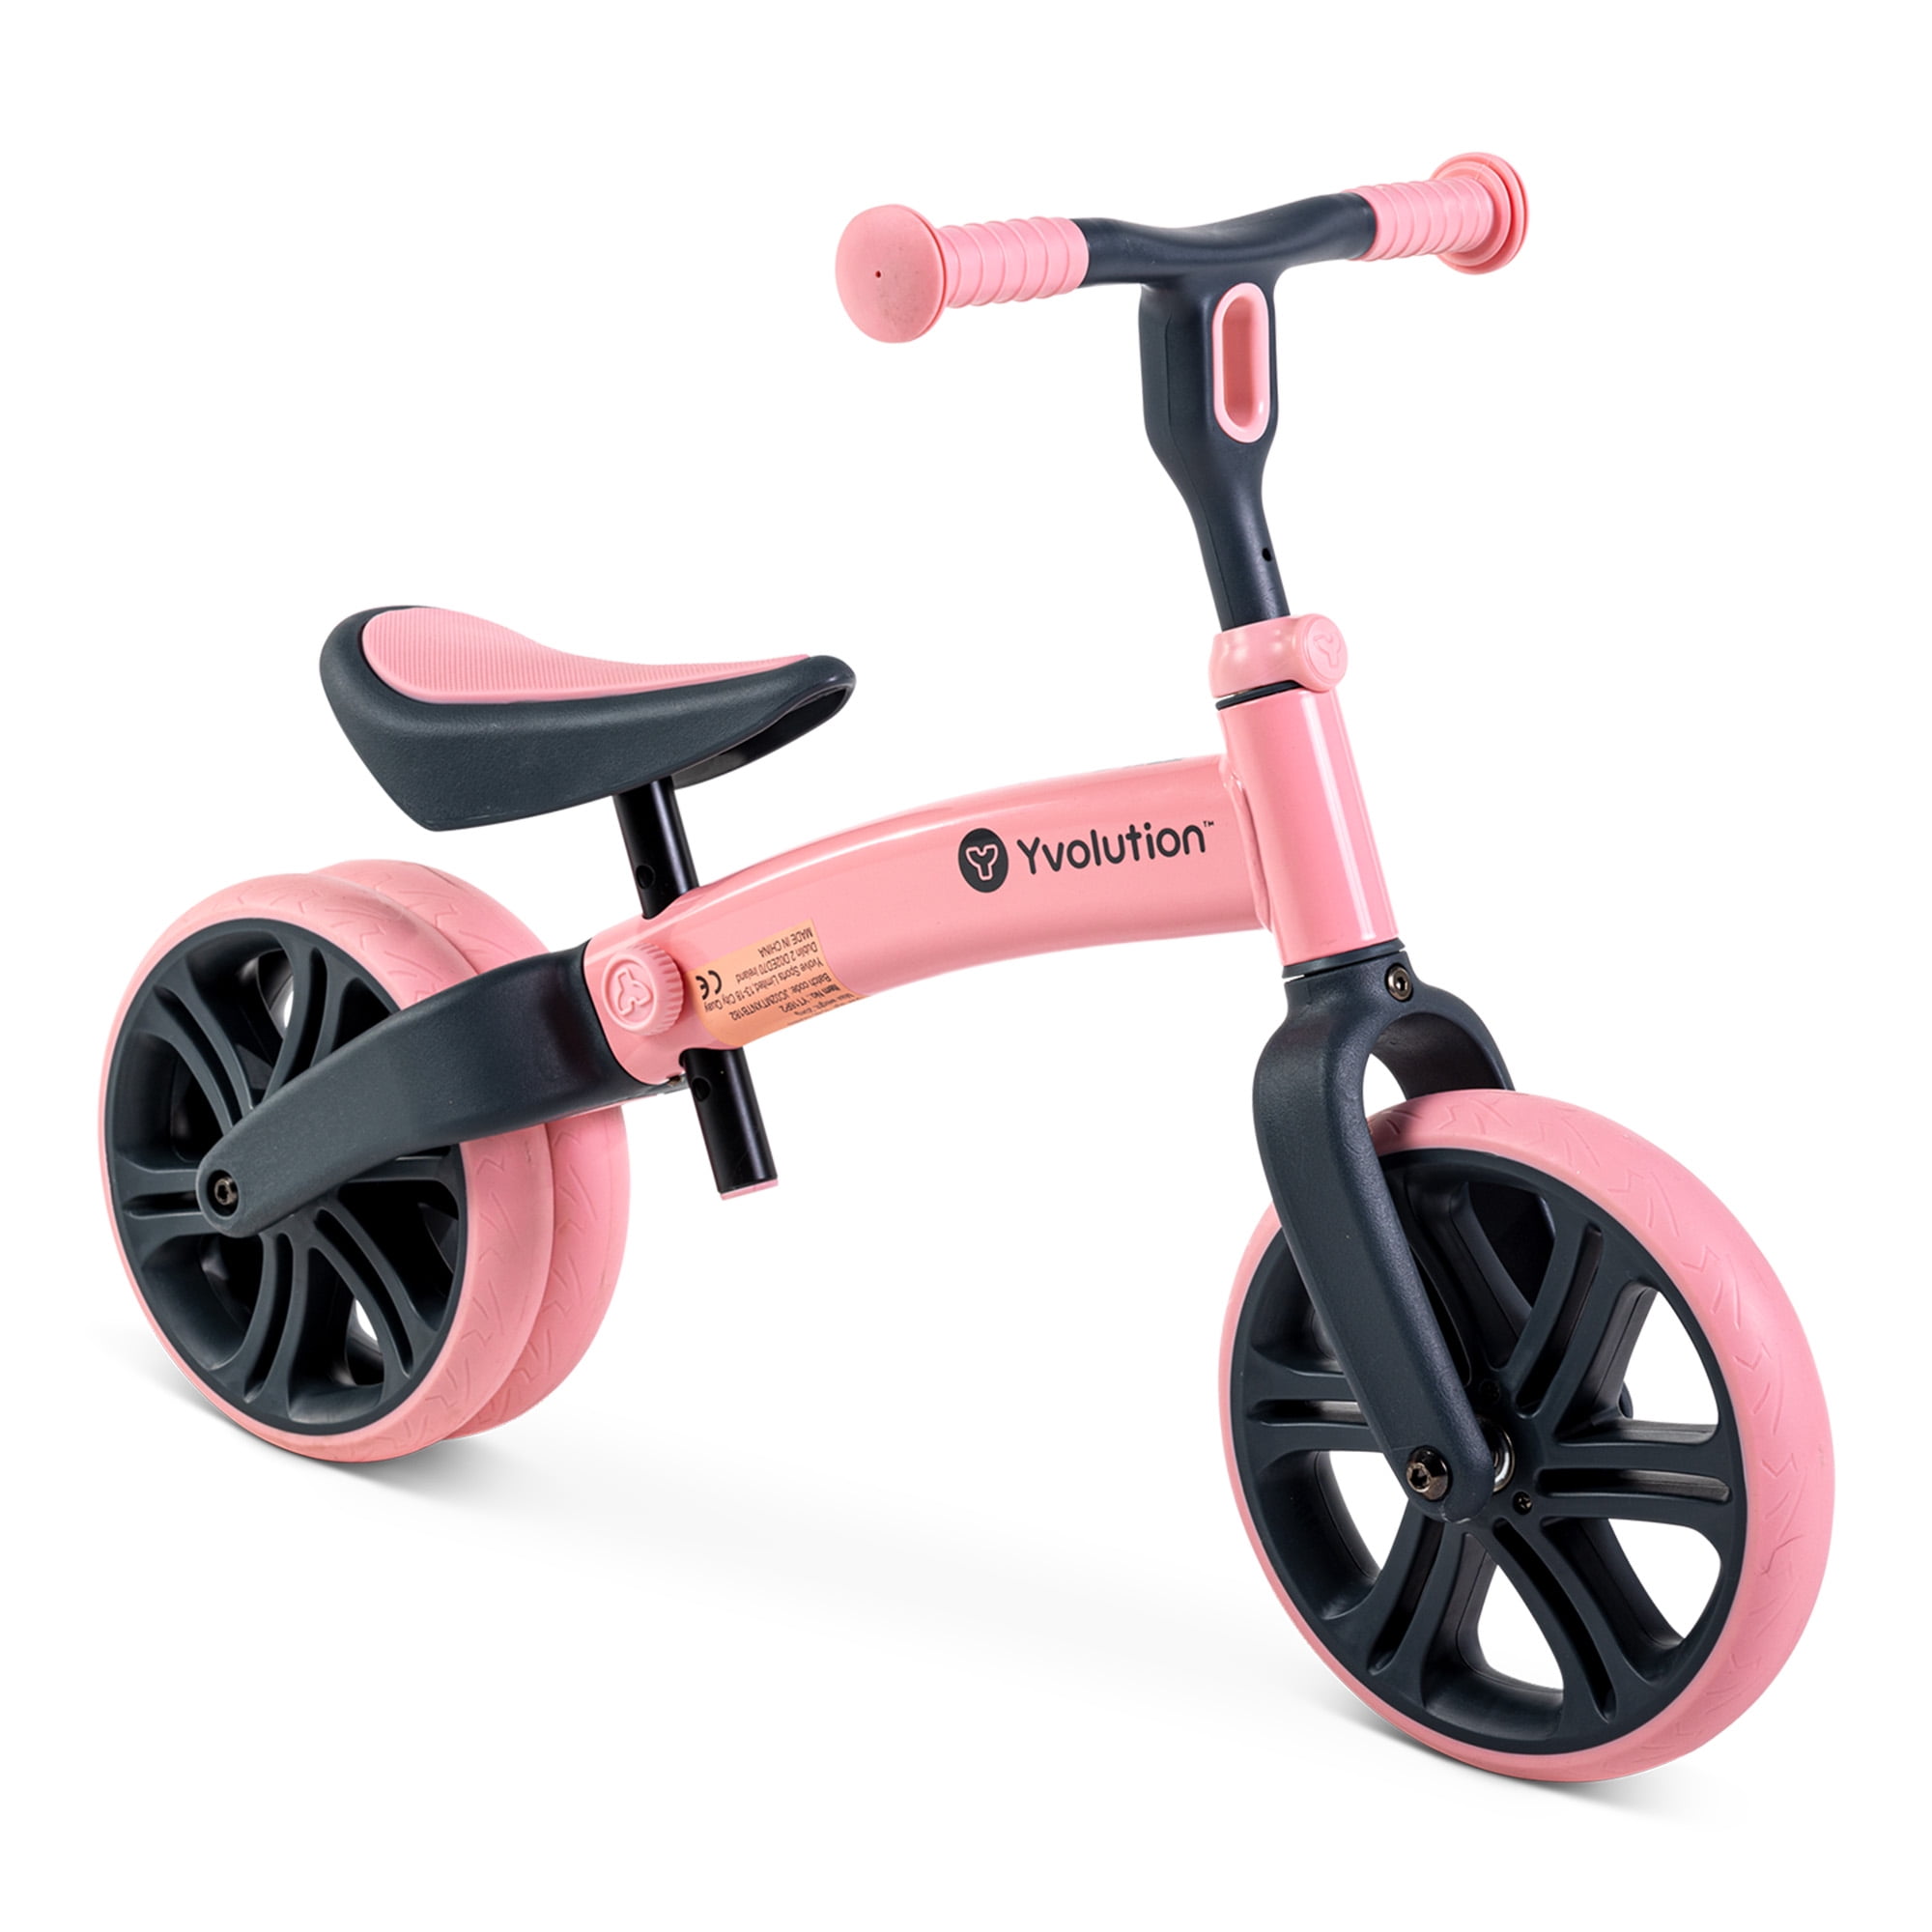 Boys 18 Yvolution and Bike Old Girls, 9\'\' Velo 3 Months to Balance (Pink) Years Toddler Wheel